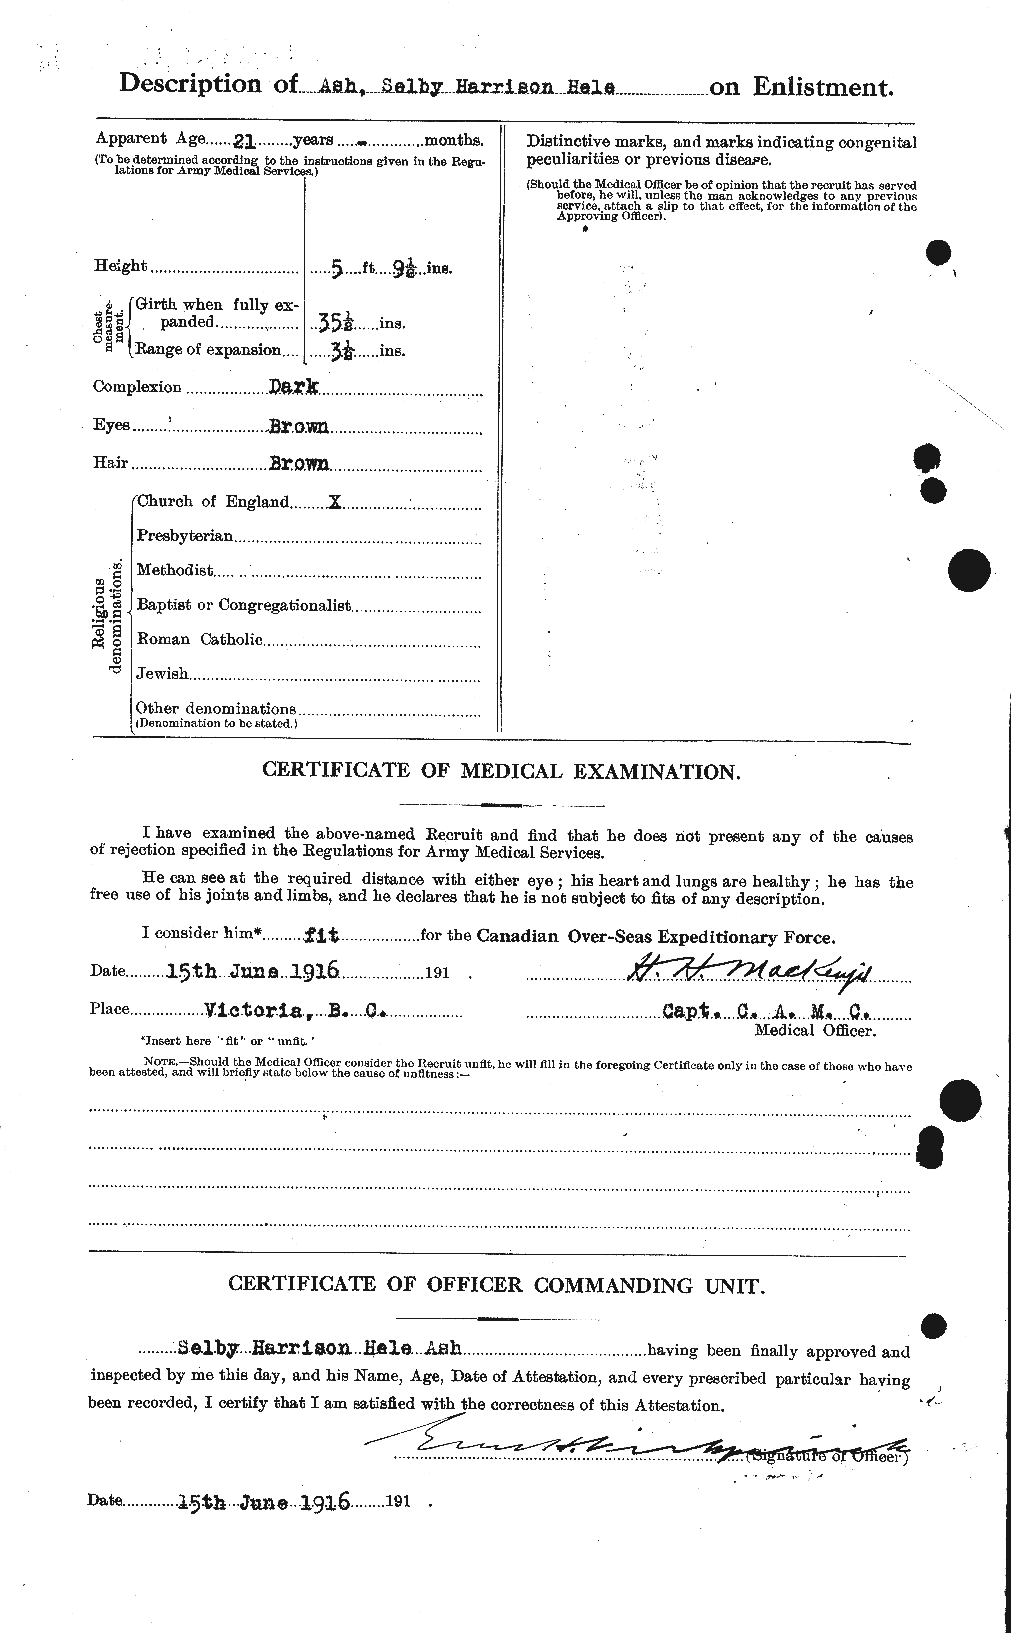 Personnel Records of the First World War - CEF 214590b